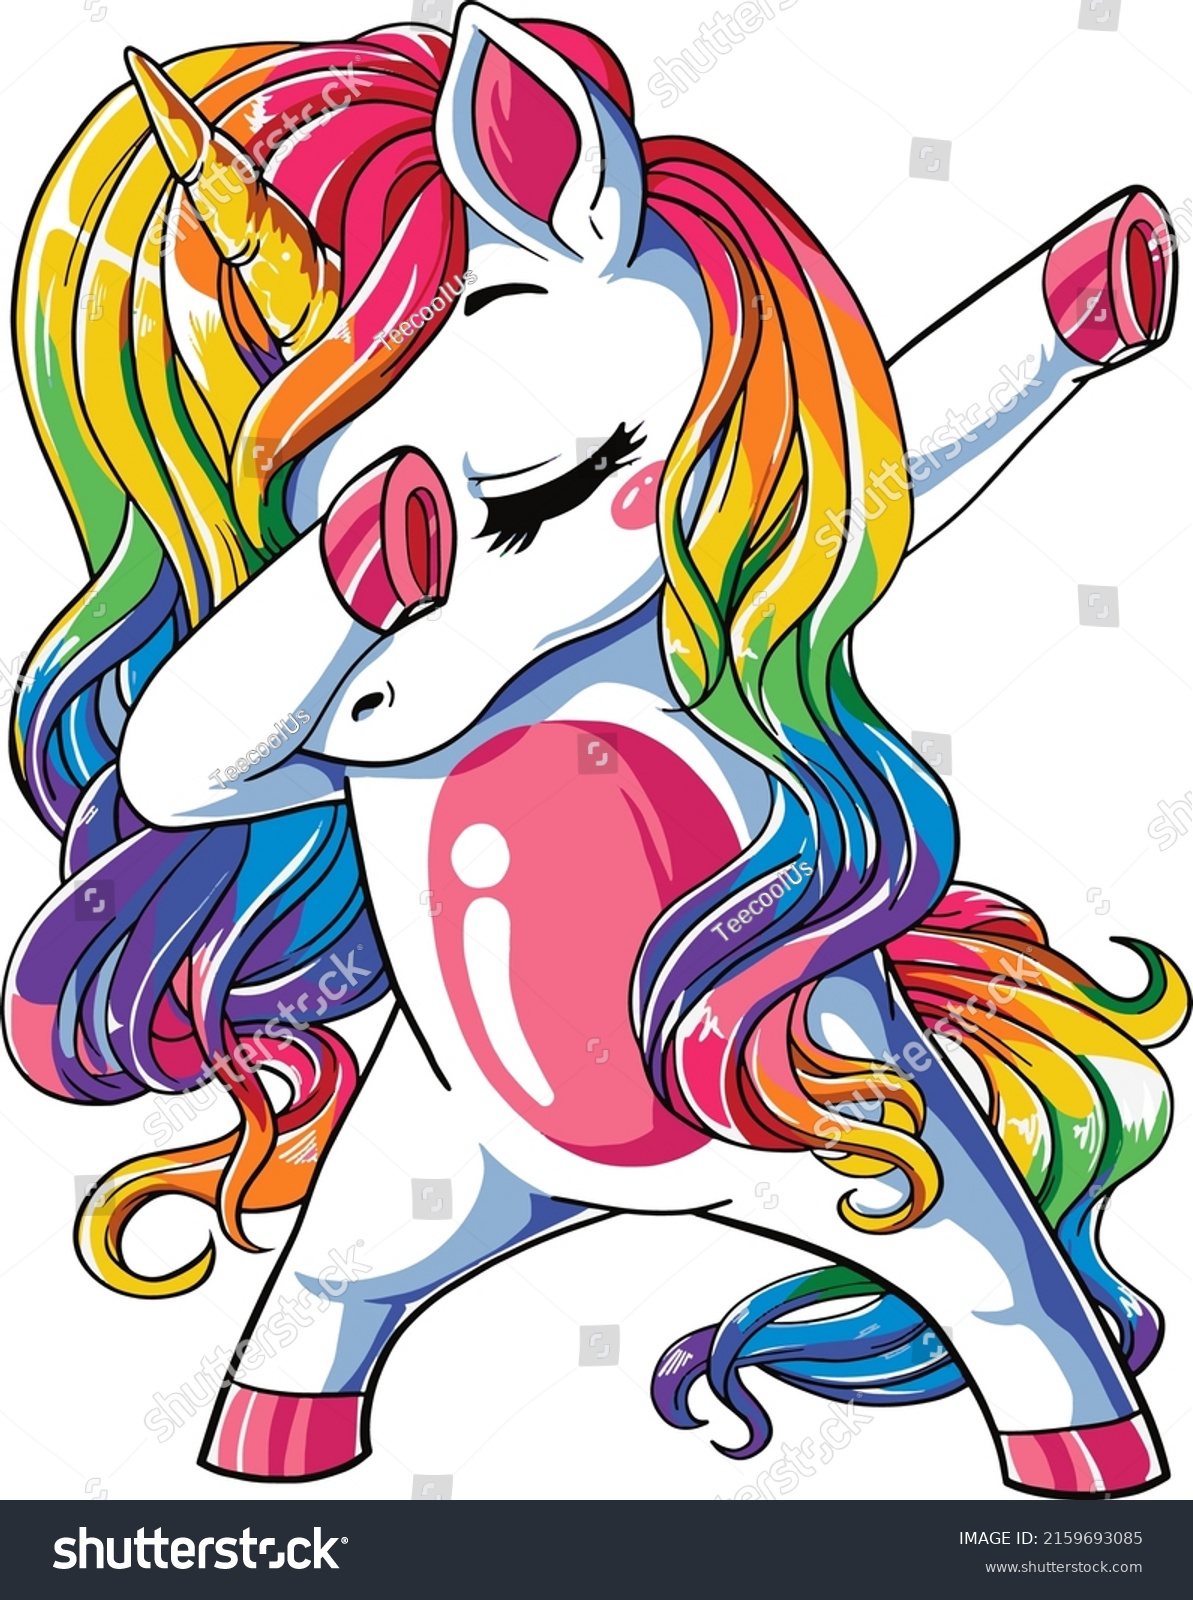 SVG of This Dabbing Unicorn Design is the perfect gift for Phantasy lovers. Awesome Dab Unicorn doing the dab dance. Amazing Dabbing Unicorn with rainbow colors. svg